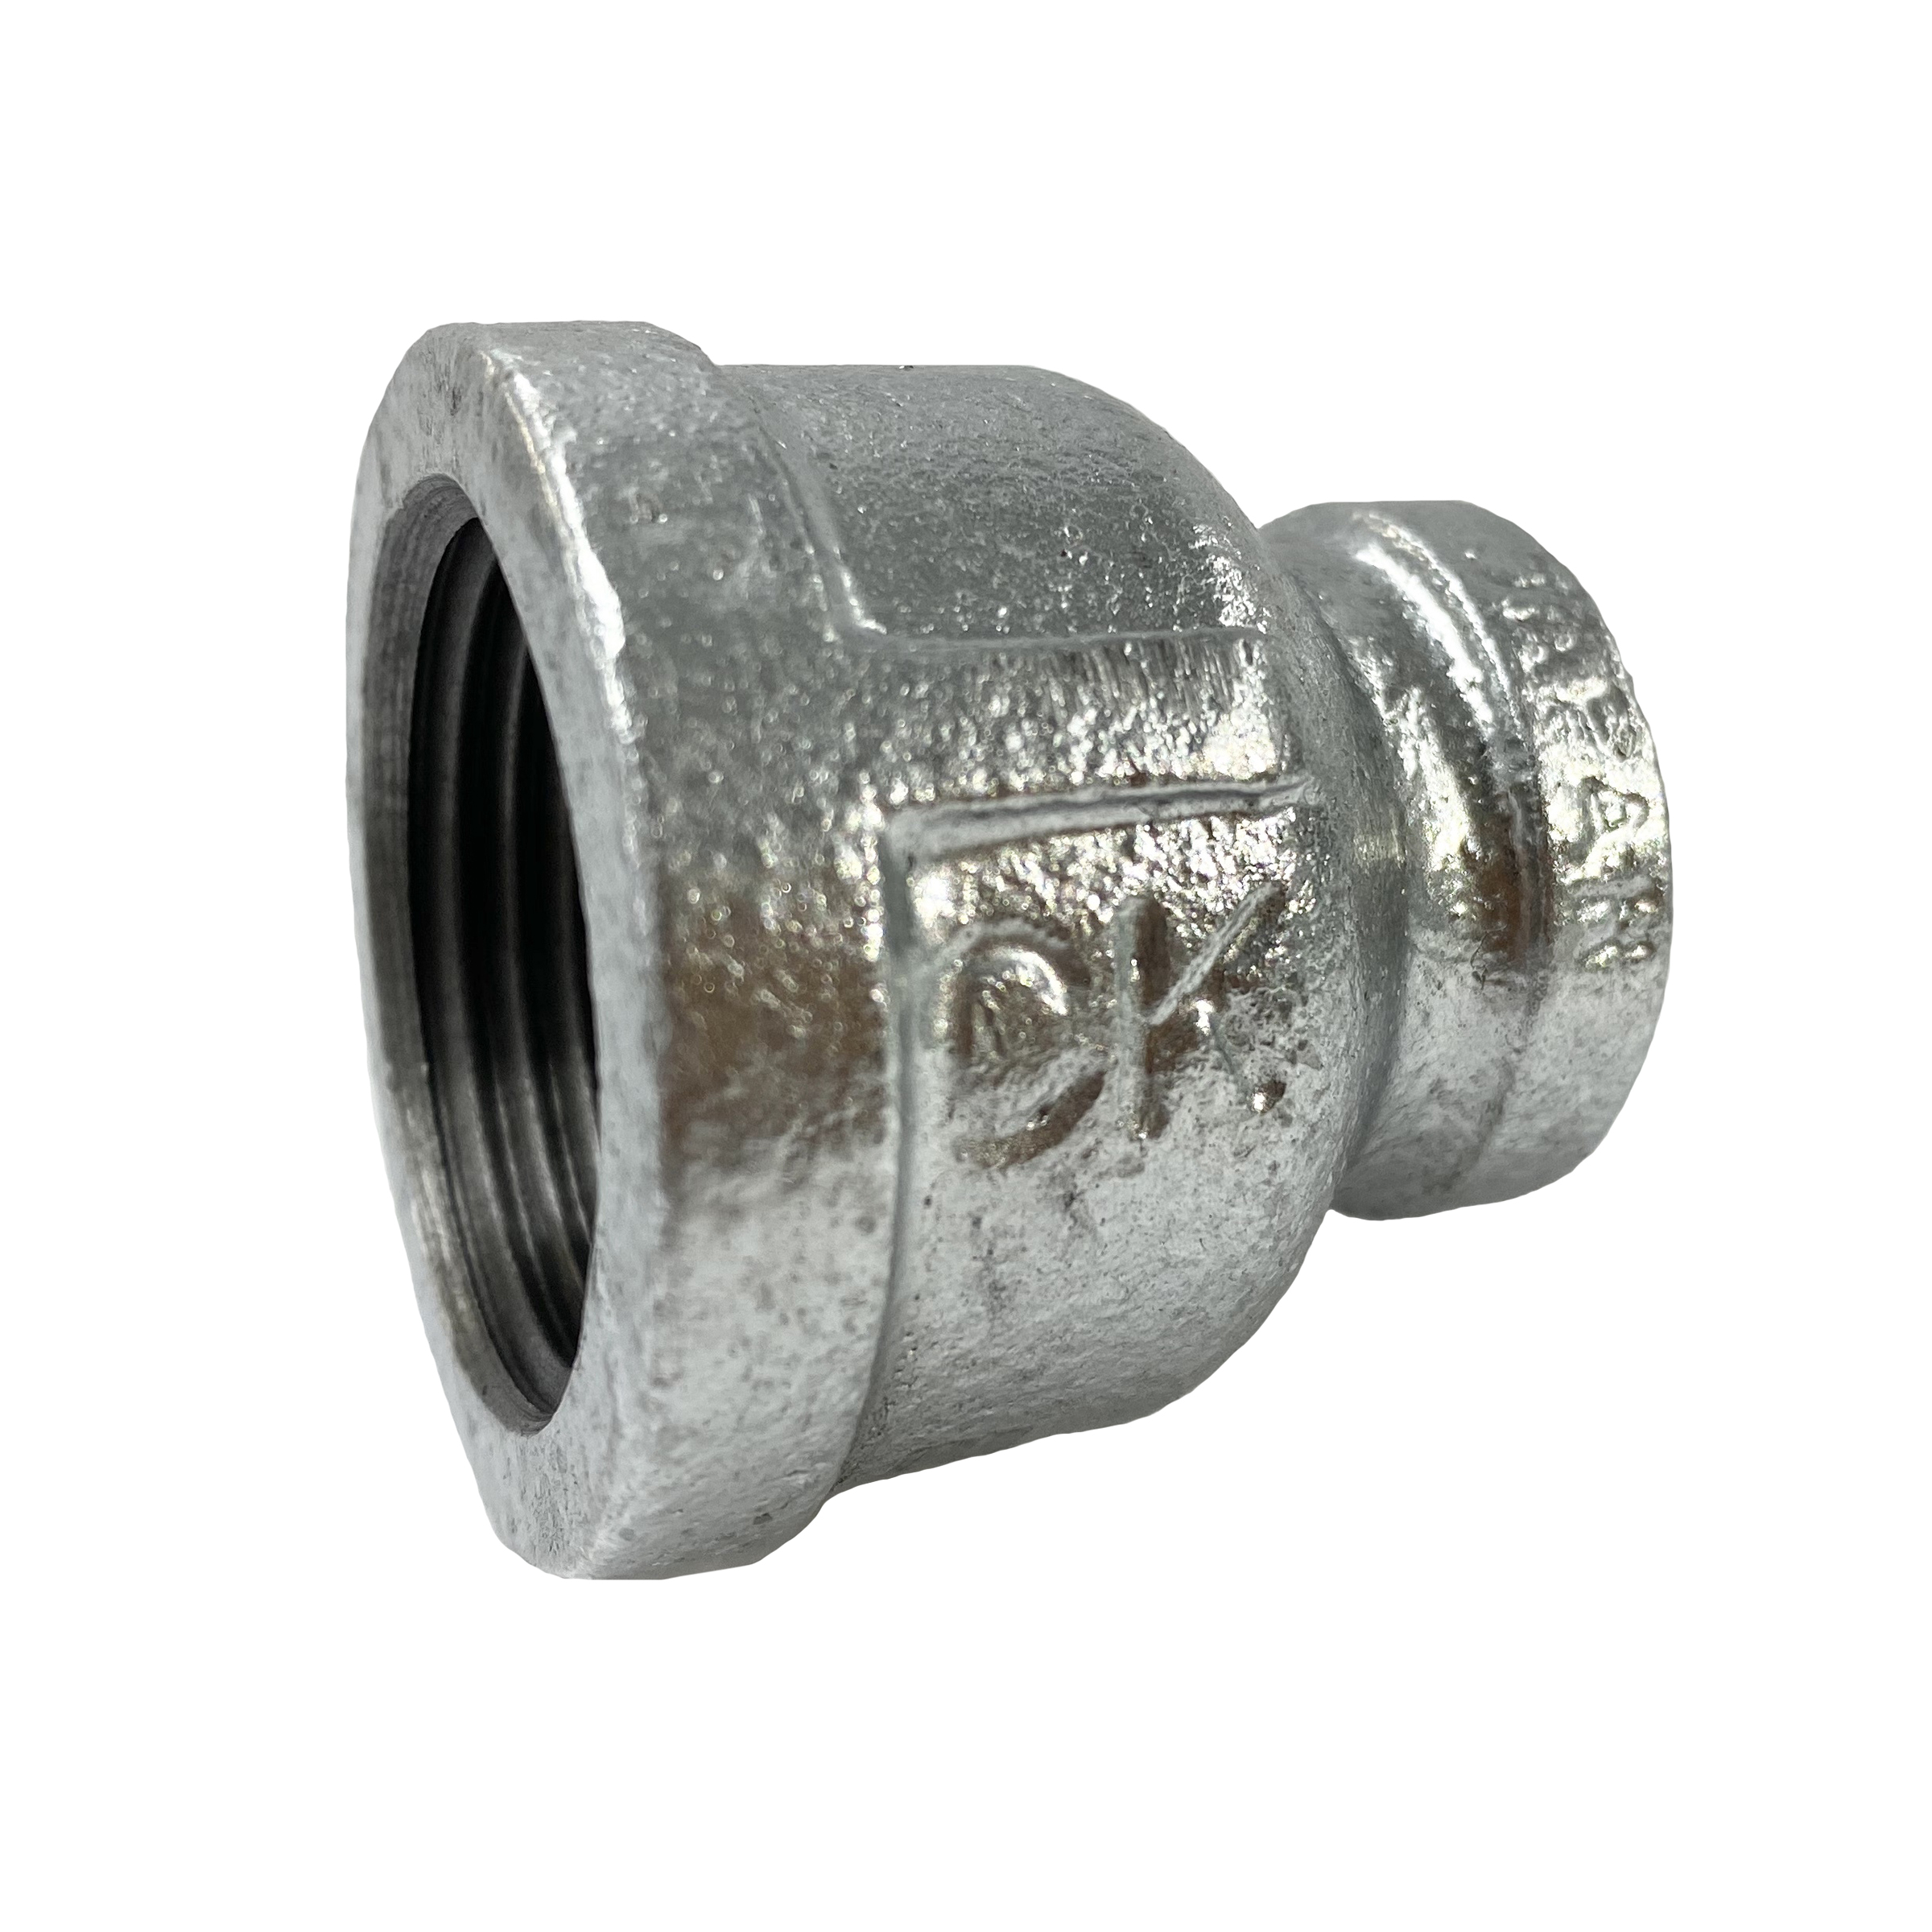 CK Fittings - Screw-in Type Malleable Cast Iron Pipe Fitting - Socket with Different Diameters with Band BRS-40X25-W